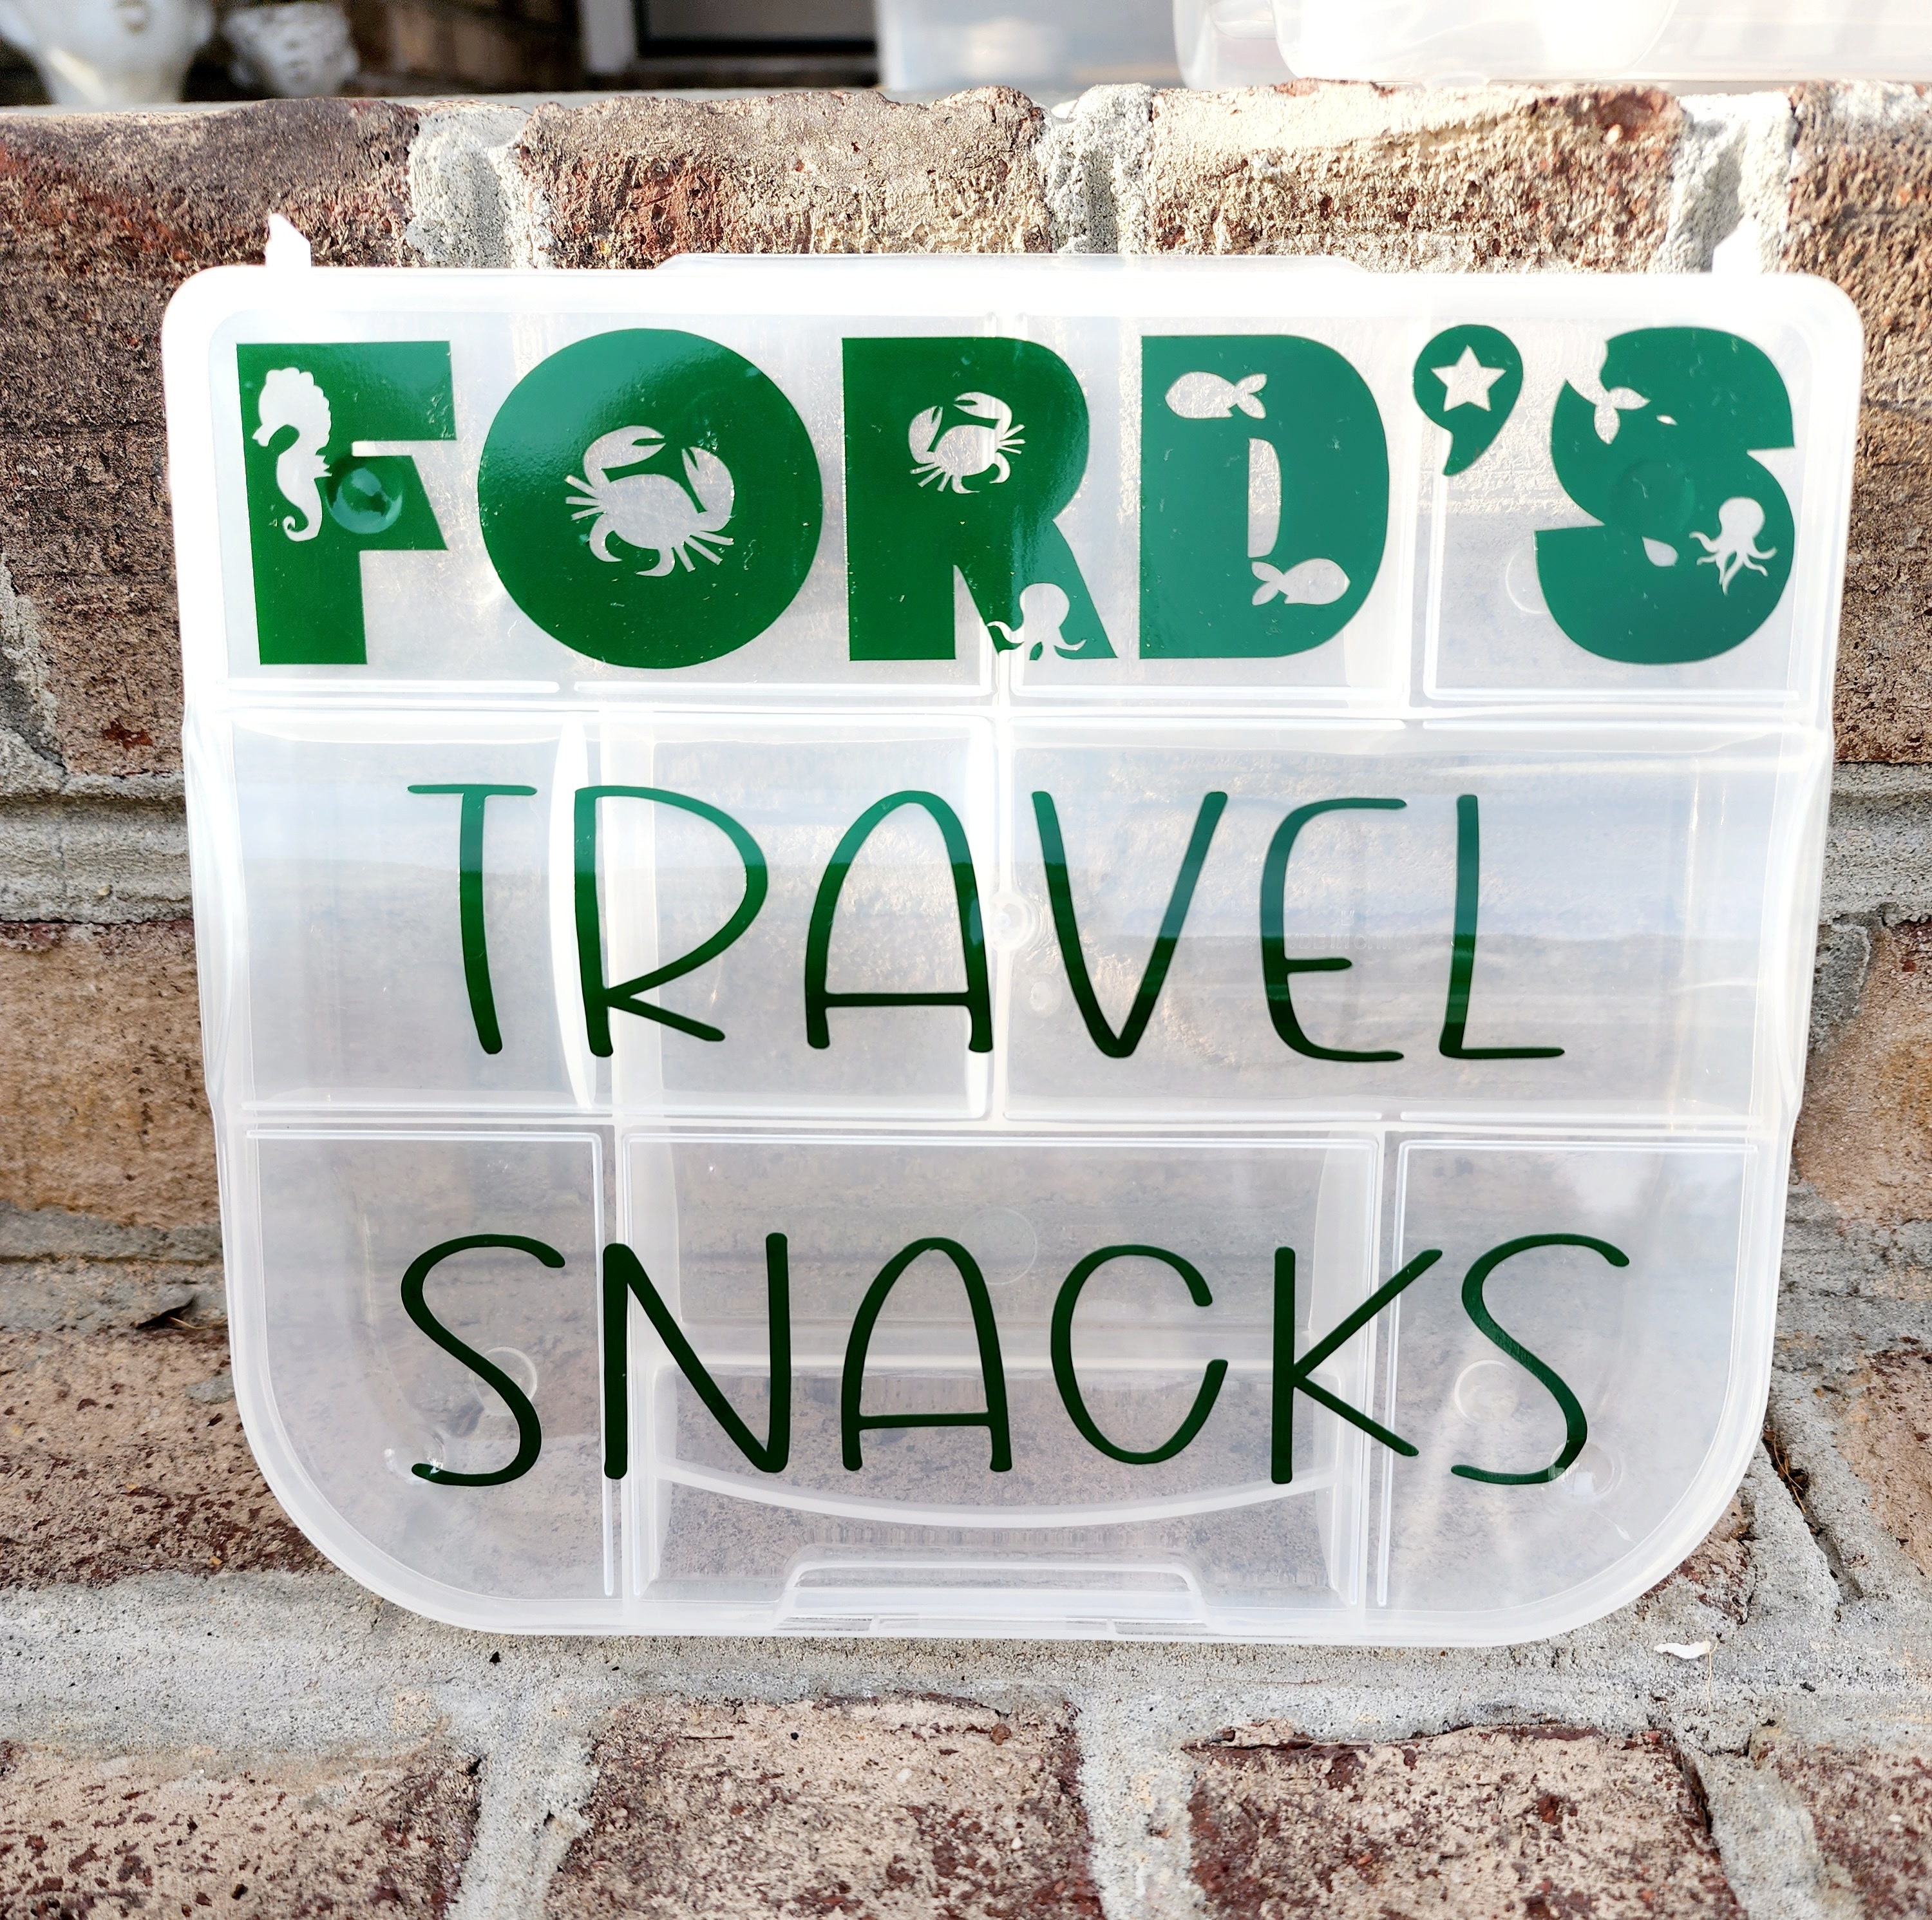 Summer Road Trip Lunch Boxes and Snack Packs